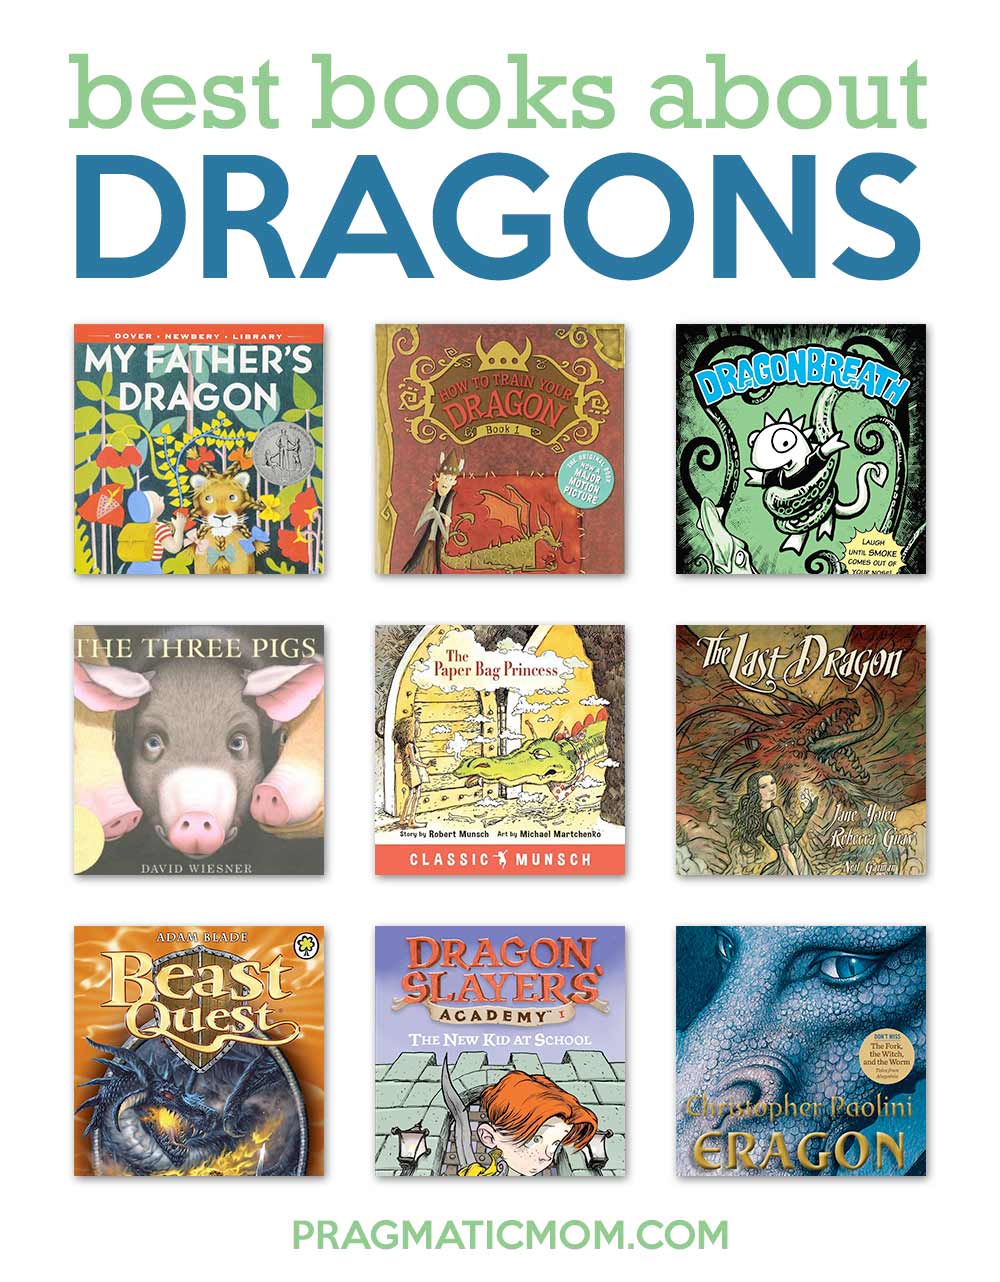 Top 10: Best Dragon Kid's Books for All Ages (ages 2-14)